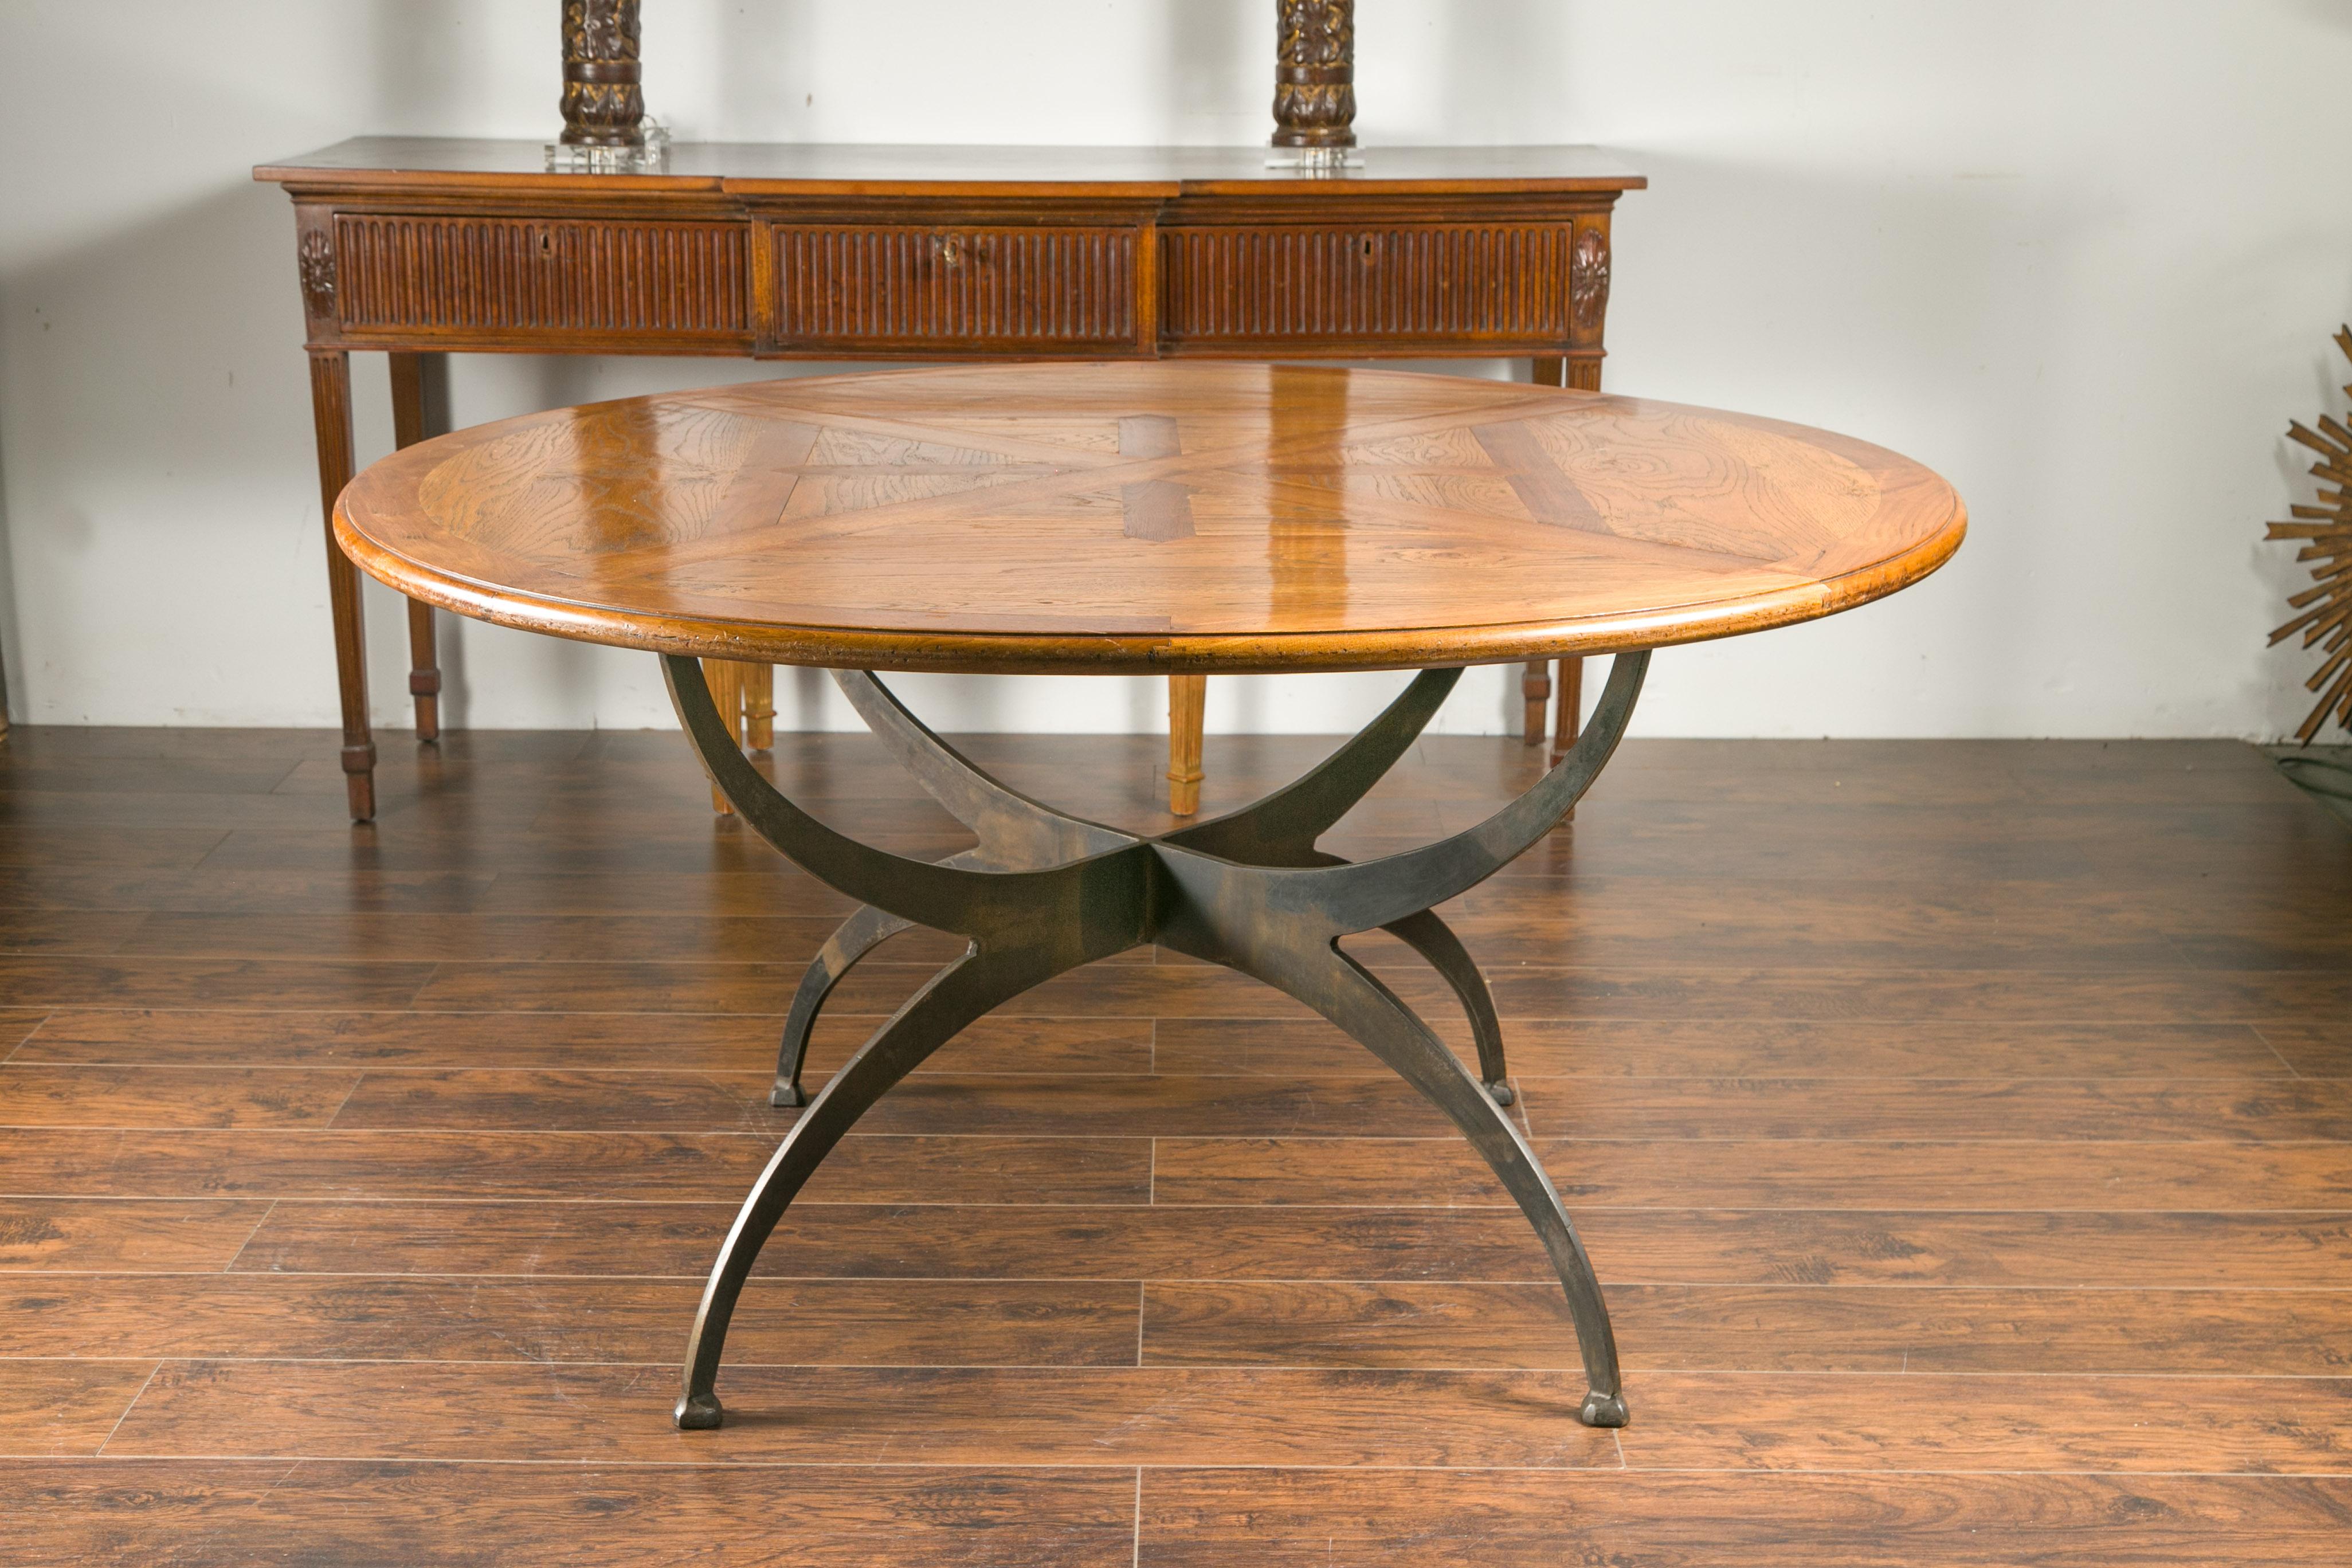 A French dining table with round parquetry top from the early 20th century and new custom iron base. Capturing our attention with its circular parquetry top dating from the early 1900s, this dining table is raised on a new custom iron base made of